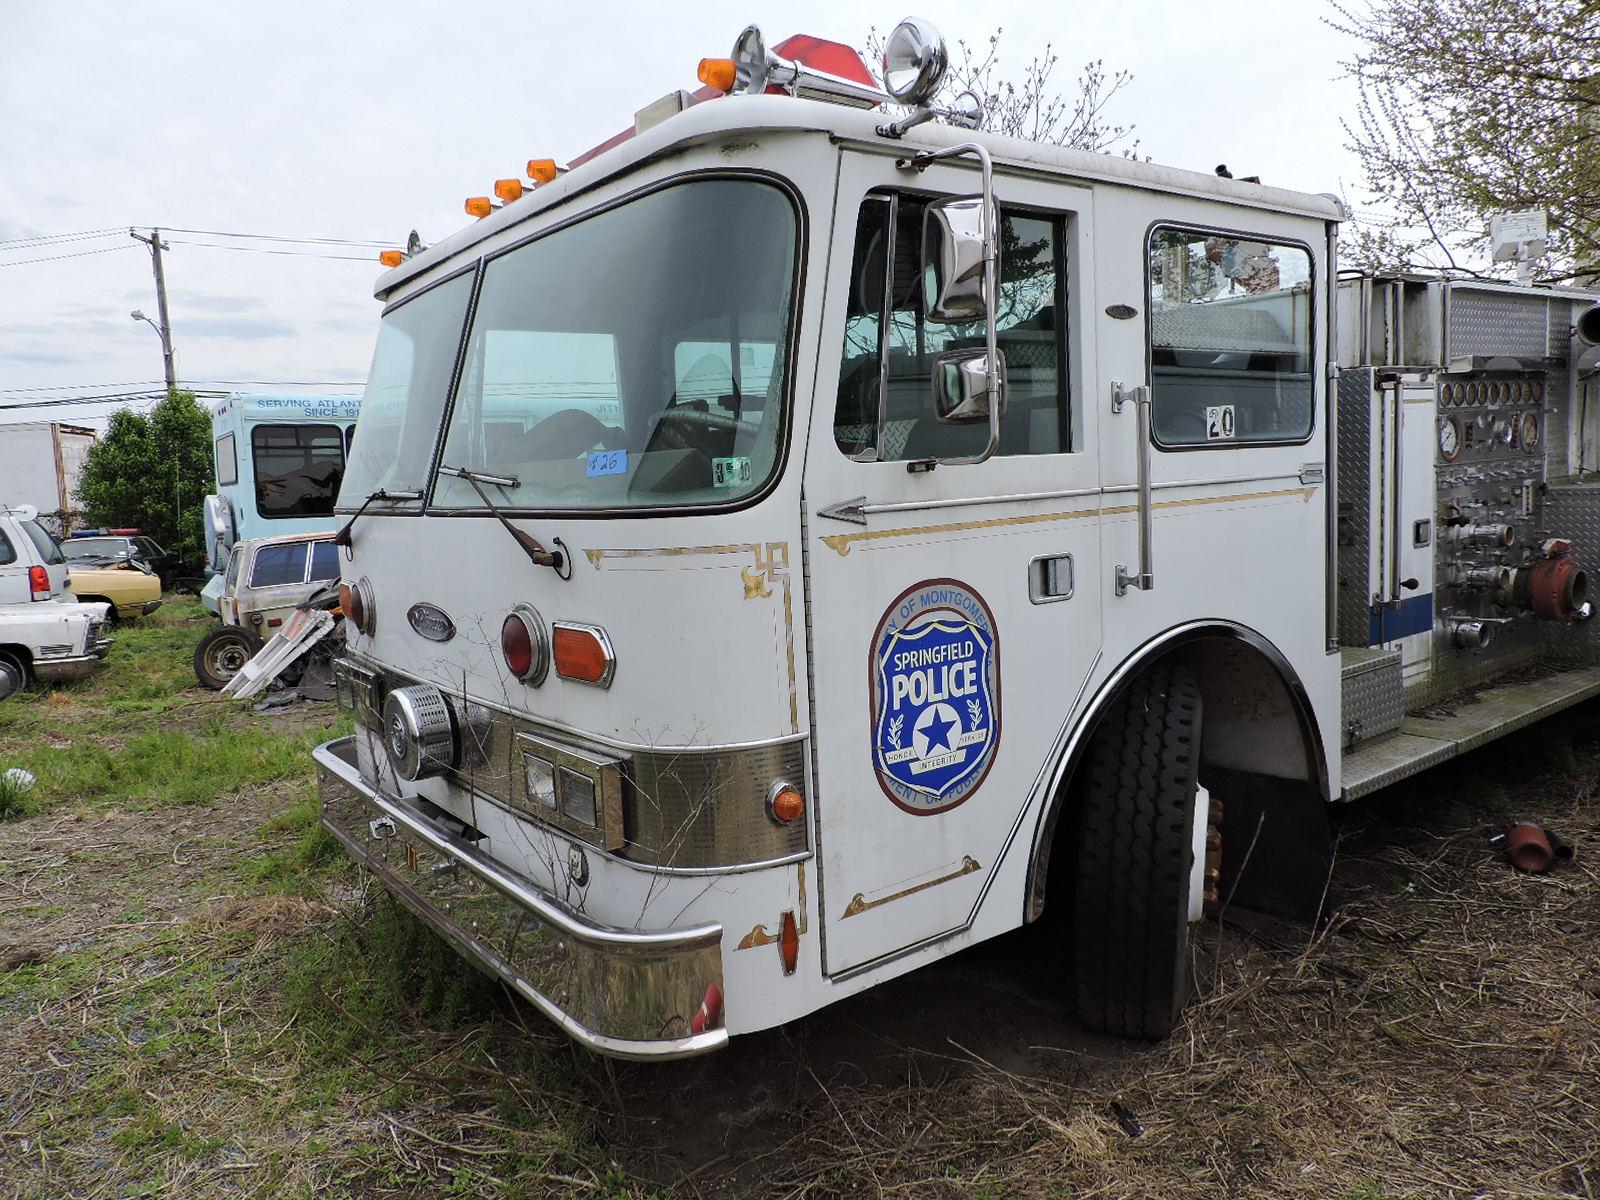 1983 Pierce Arrow Fire Engine with Detroit Diesel / Equipped at Pictured